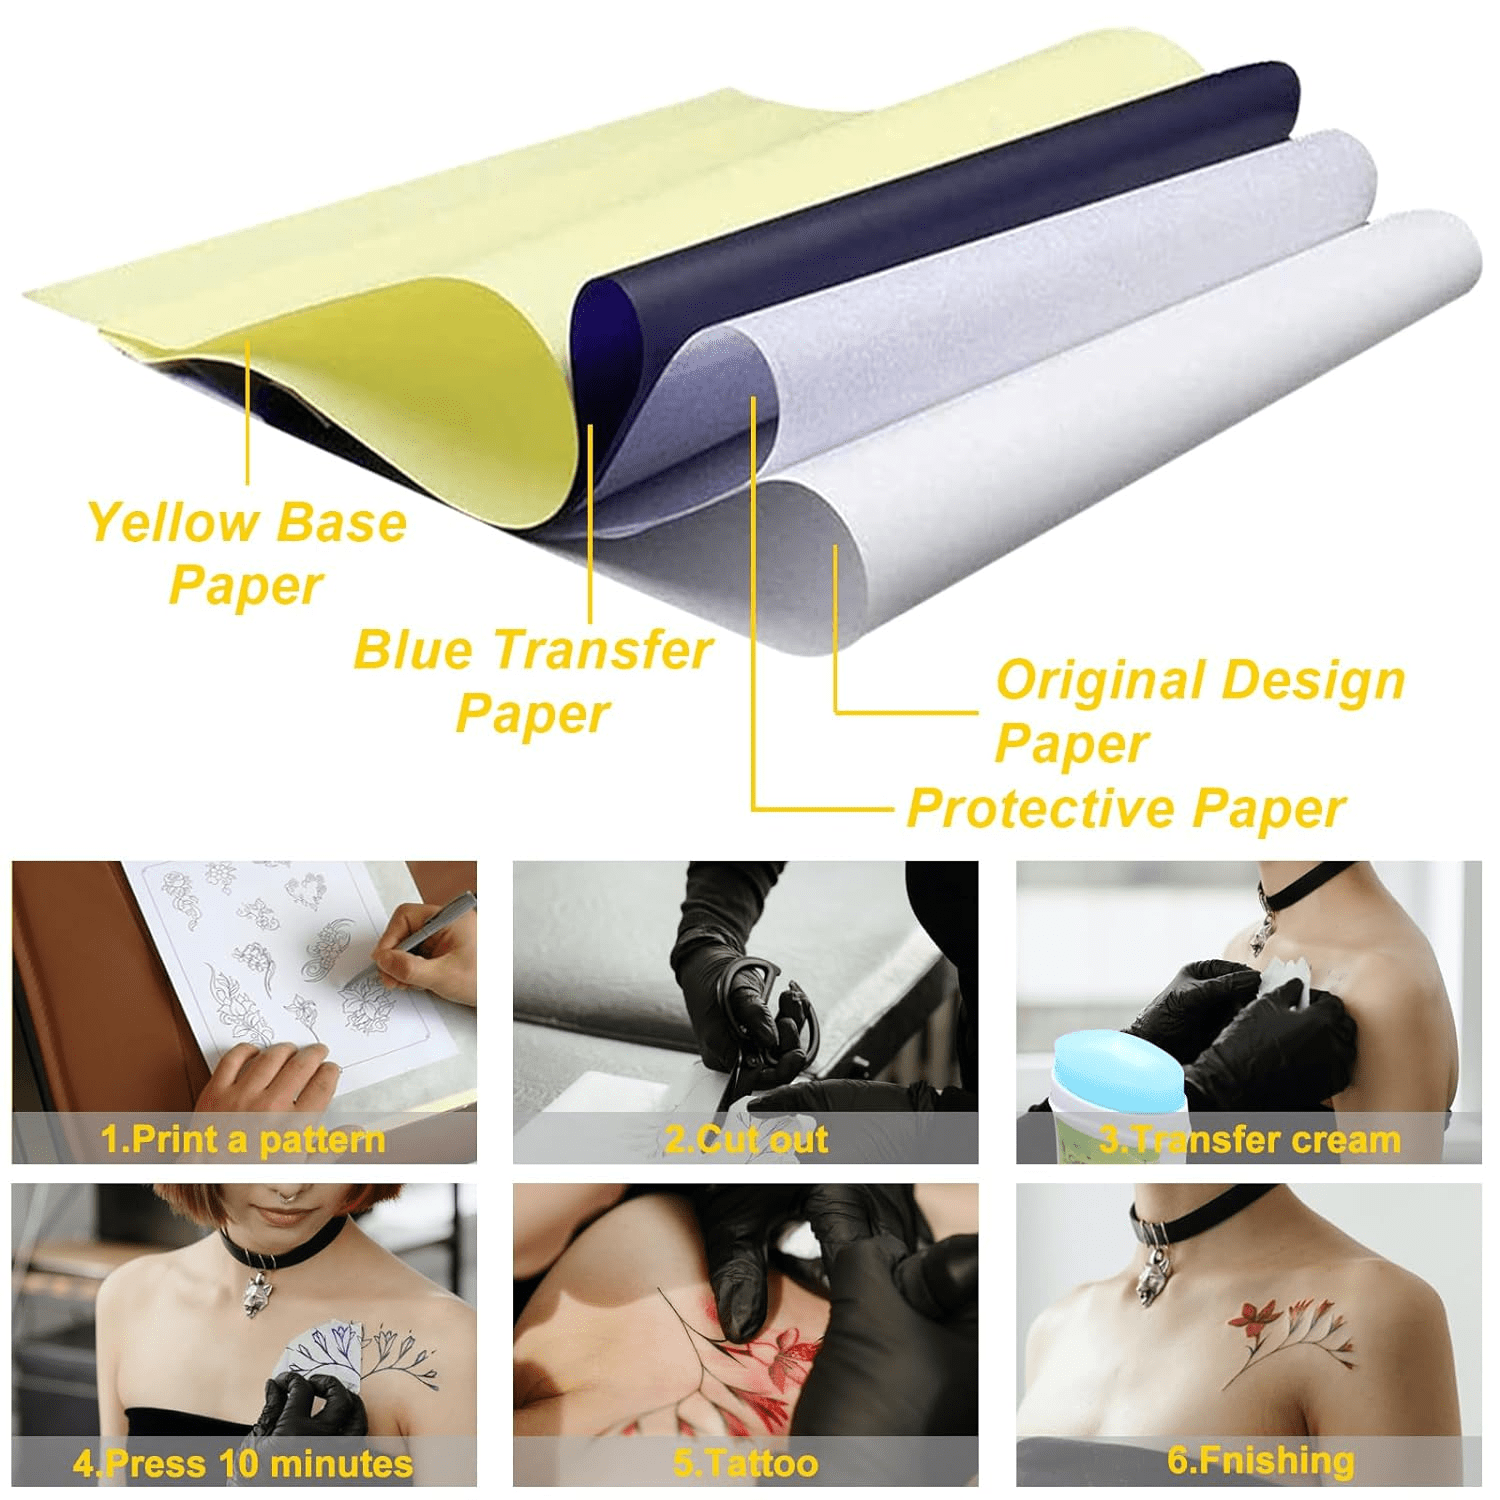 100 Sheets Of A4 Stecial Paper Spirit Master For Tattoo Supplies Transfer  Paper, Needle Ink Cups, And Grips Kits From Erfw897, $23.26